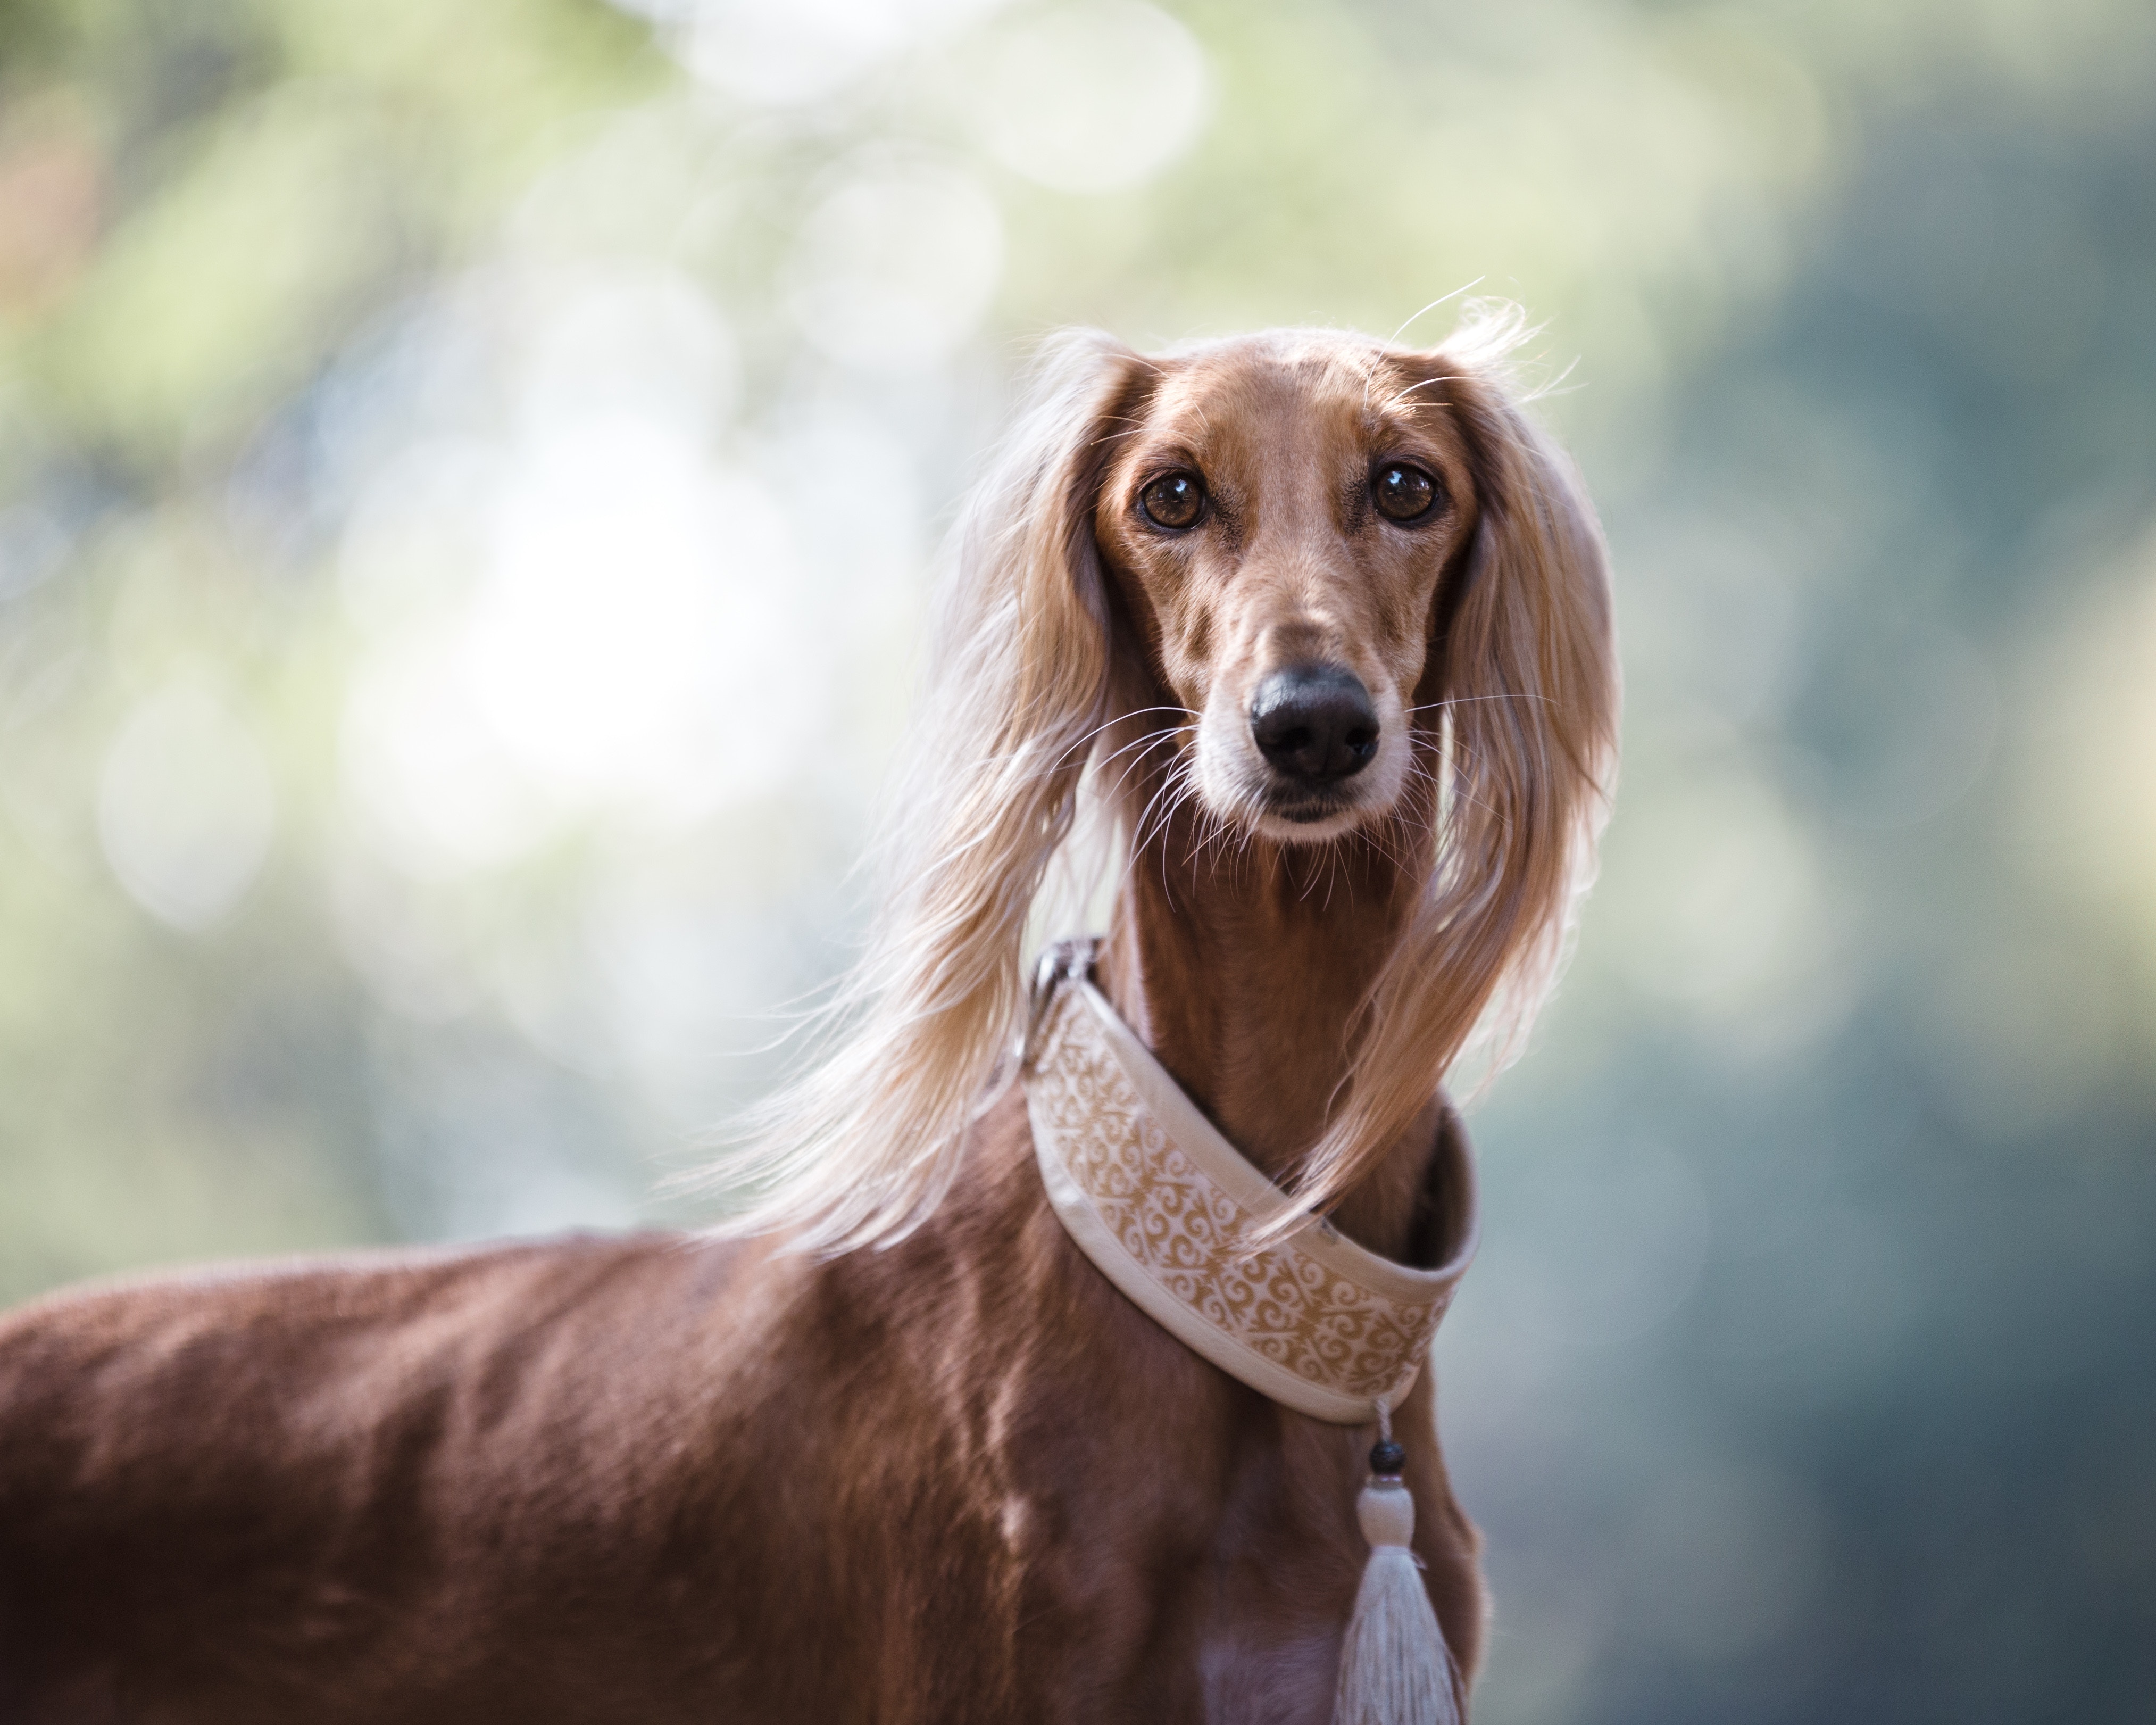 The Saluki is so elegant and graceful looking.